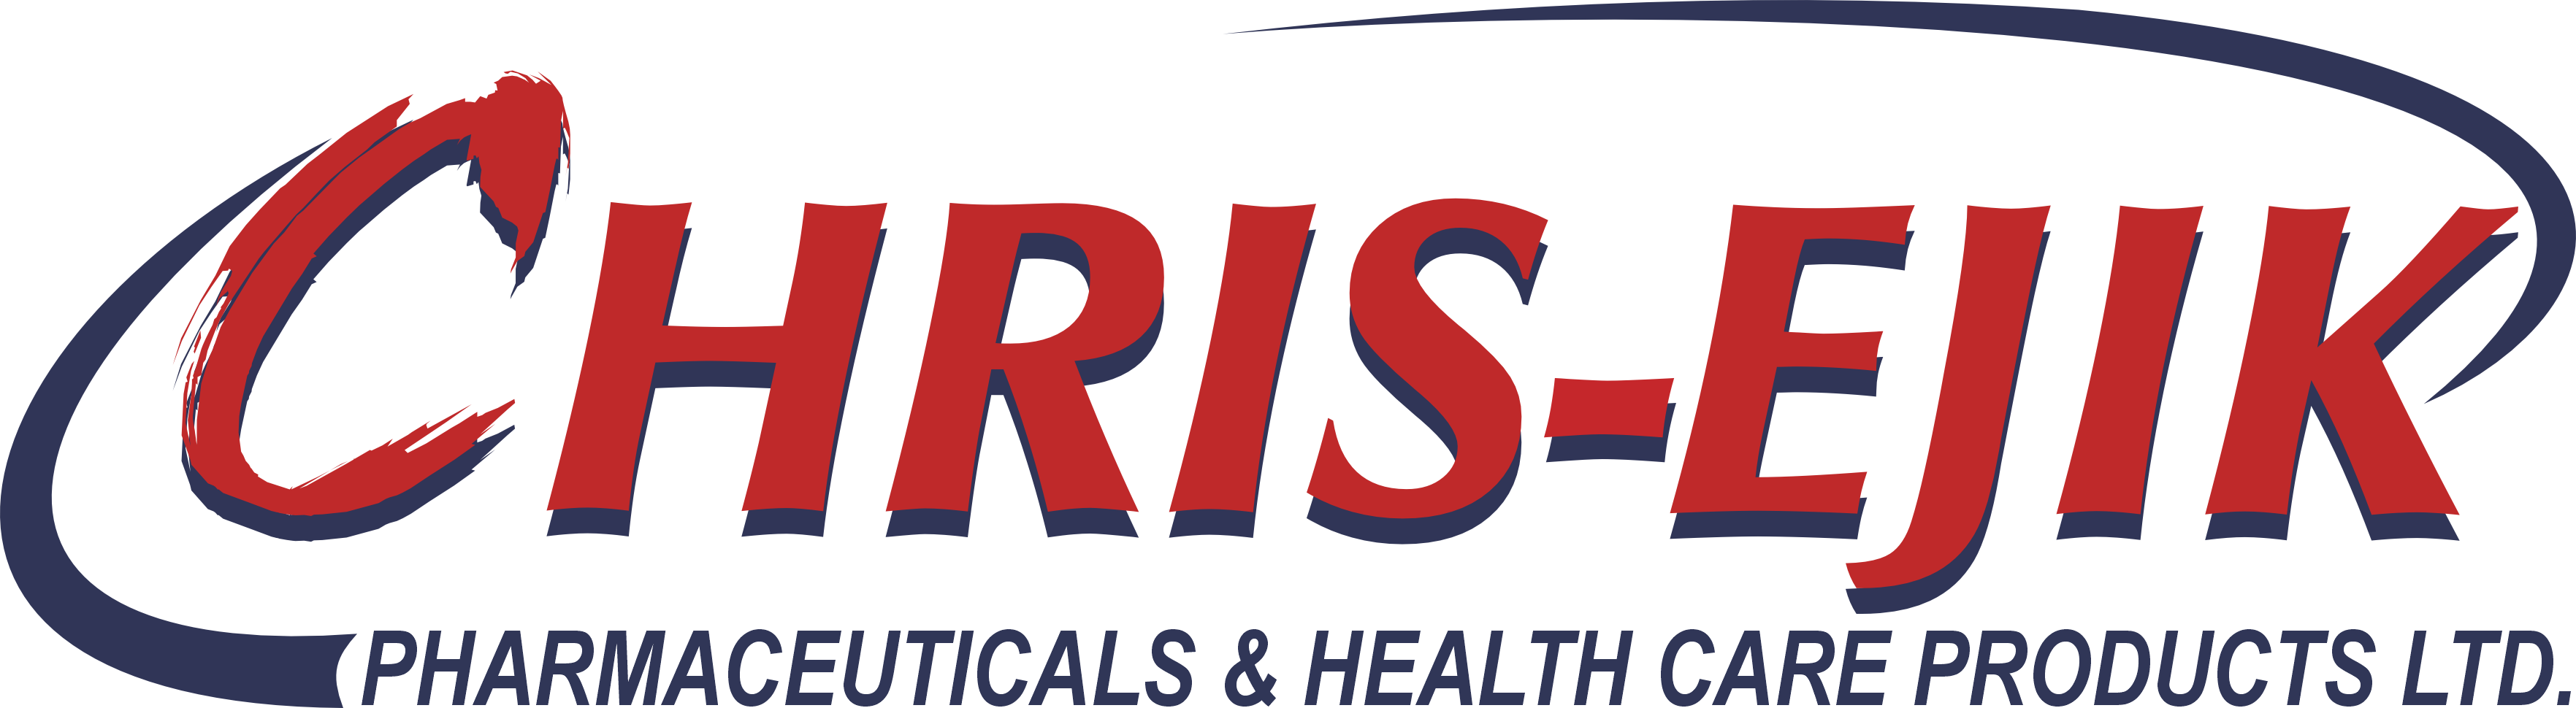 Chris Ejik Pharmaceuticals and Healthcare Products Limited